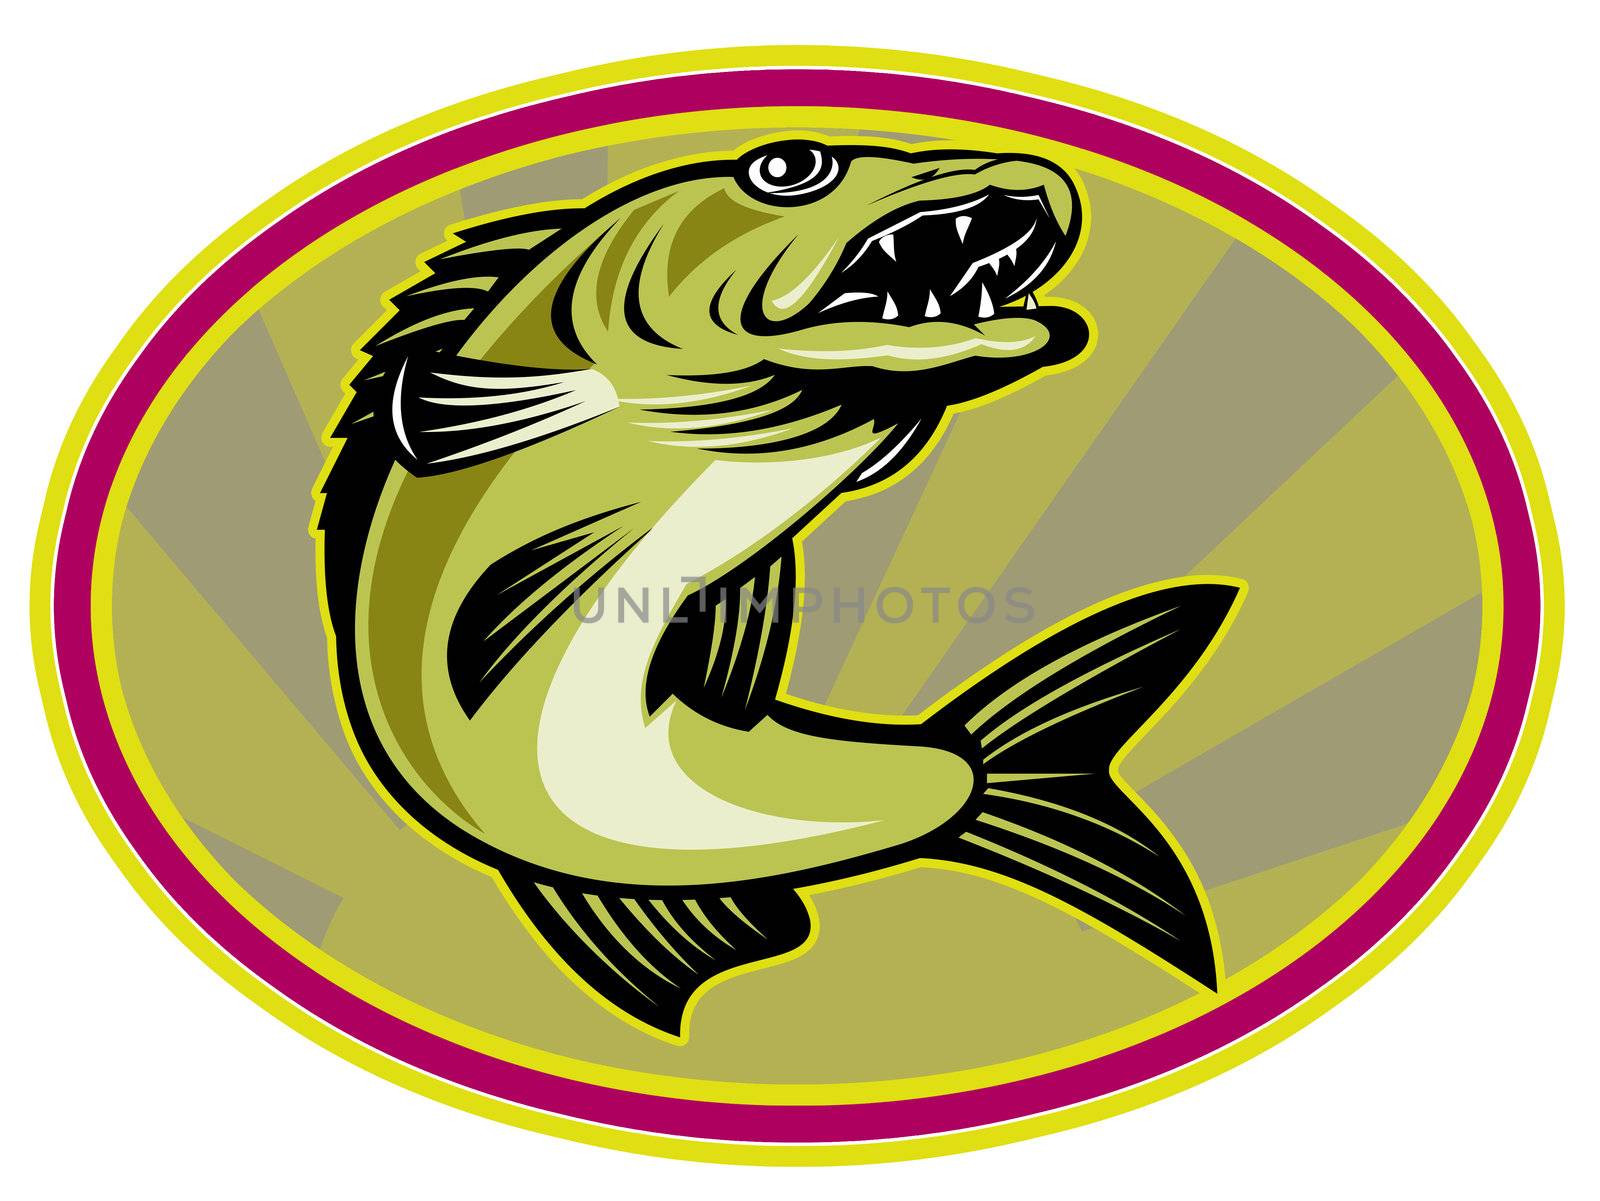 retro illustration of a walleye fish jumping set inside oval ellipse with sunburst in background 